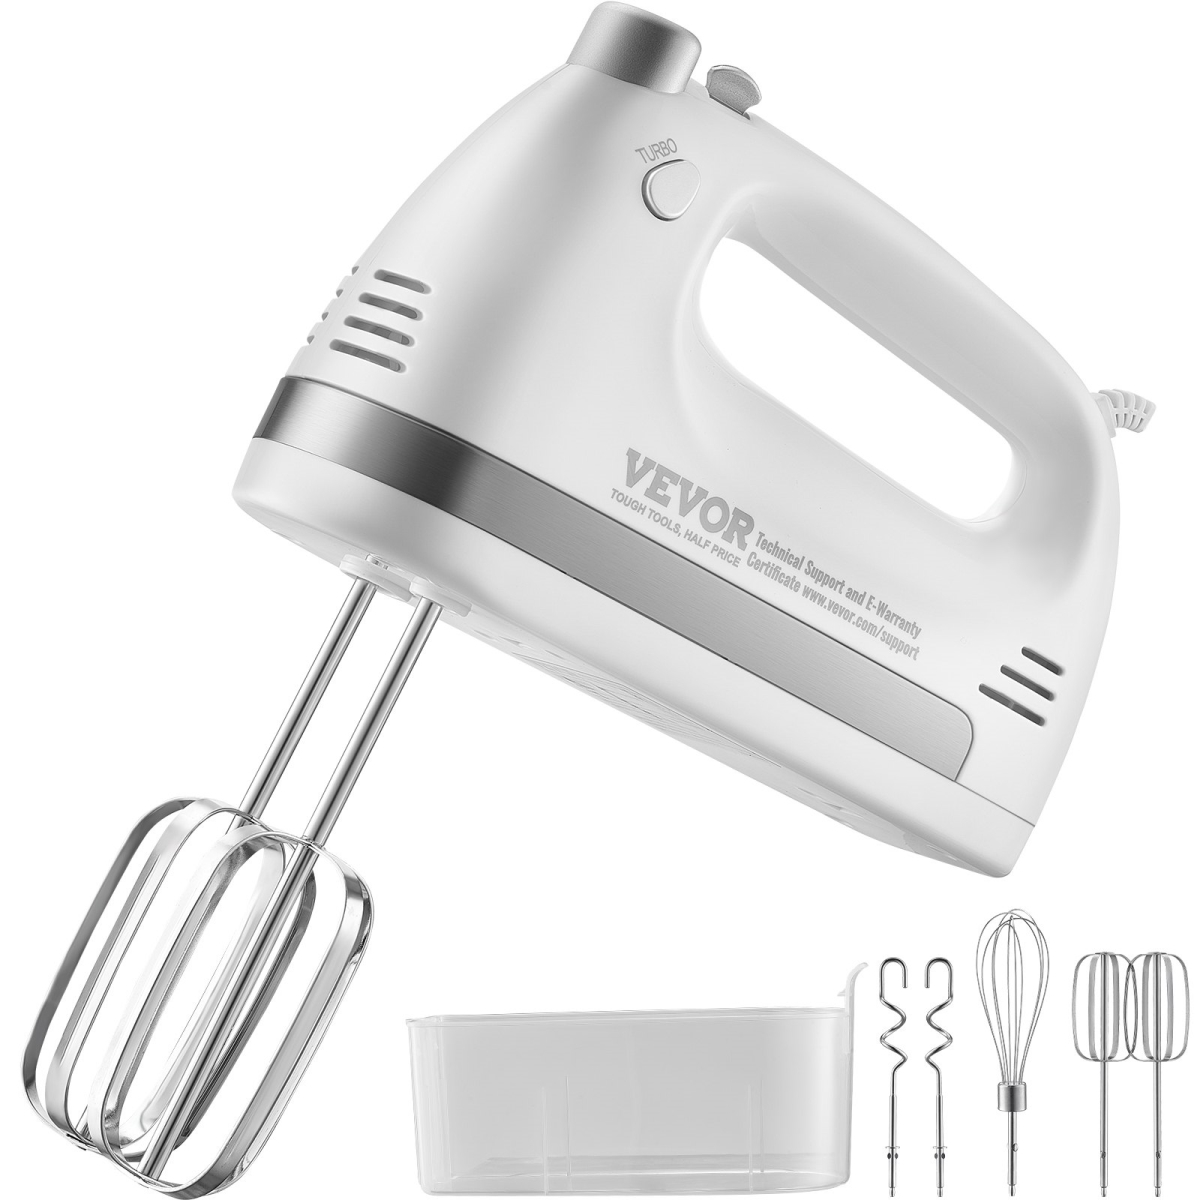 Picture of Vevor JXSDDQ250W6YRE1NUV1 250W 5-Speed Electric Hand Mixer Portable Electric Handheld Mixer Baking Supplies for Whipping Mixing Egg White